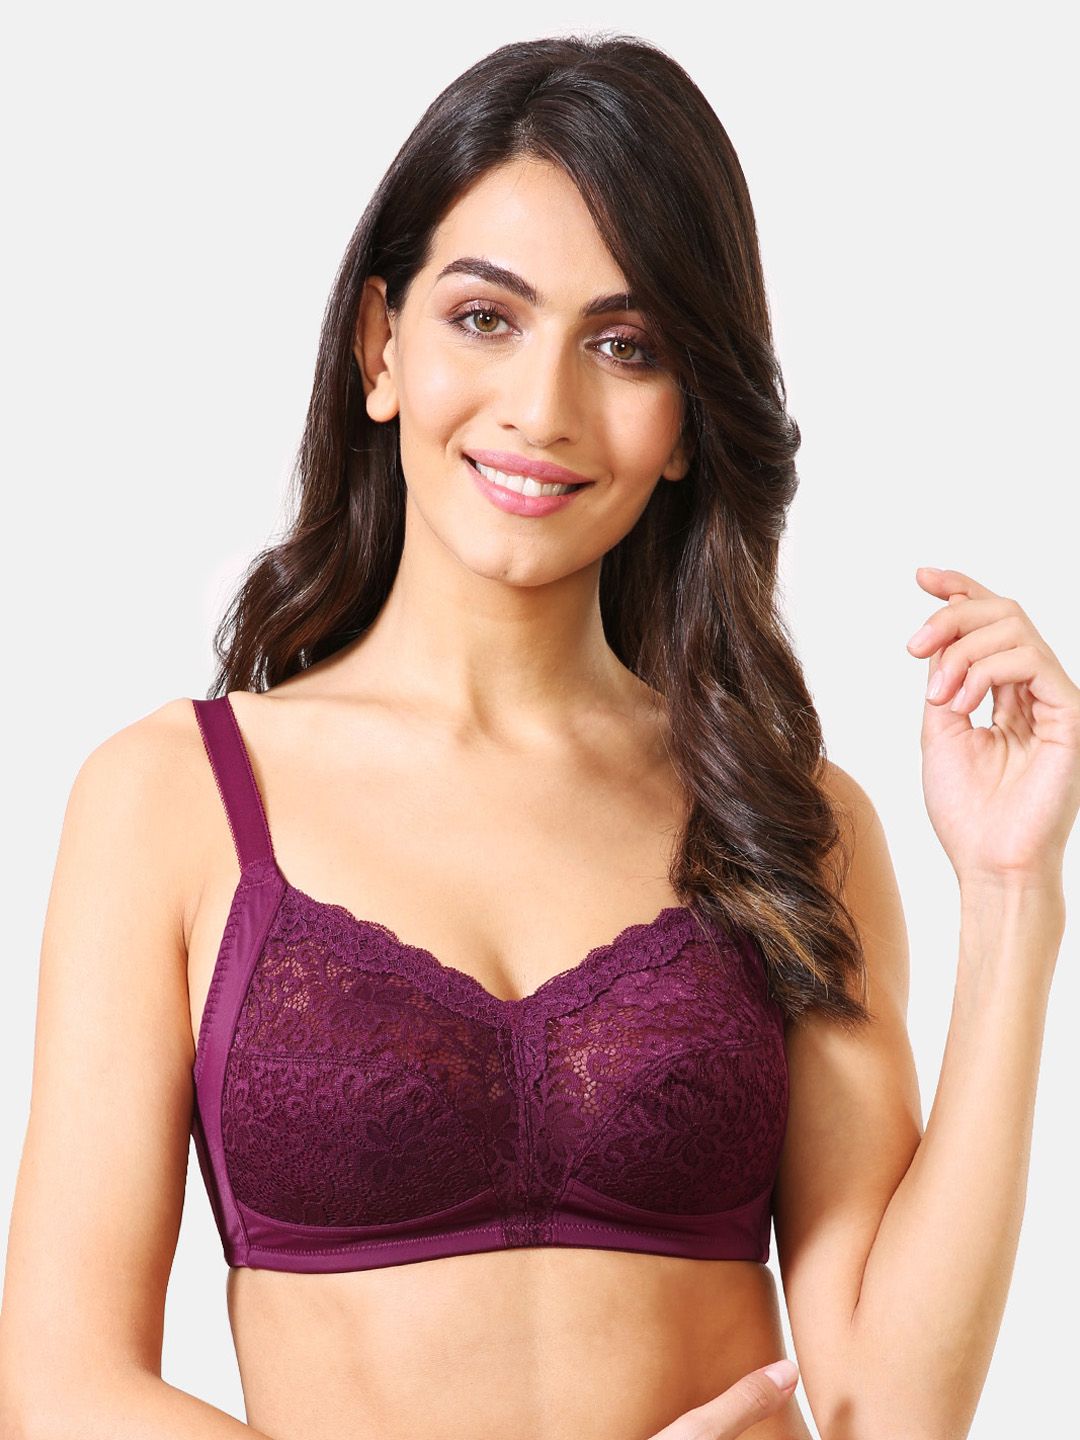 Van Heusen Maroon Lace Non-Wired Non Padded Everyday Soft Cup Bra ILIBR1LXSWW3022004 Price in India